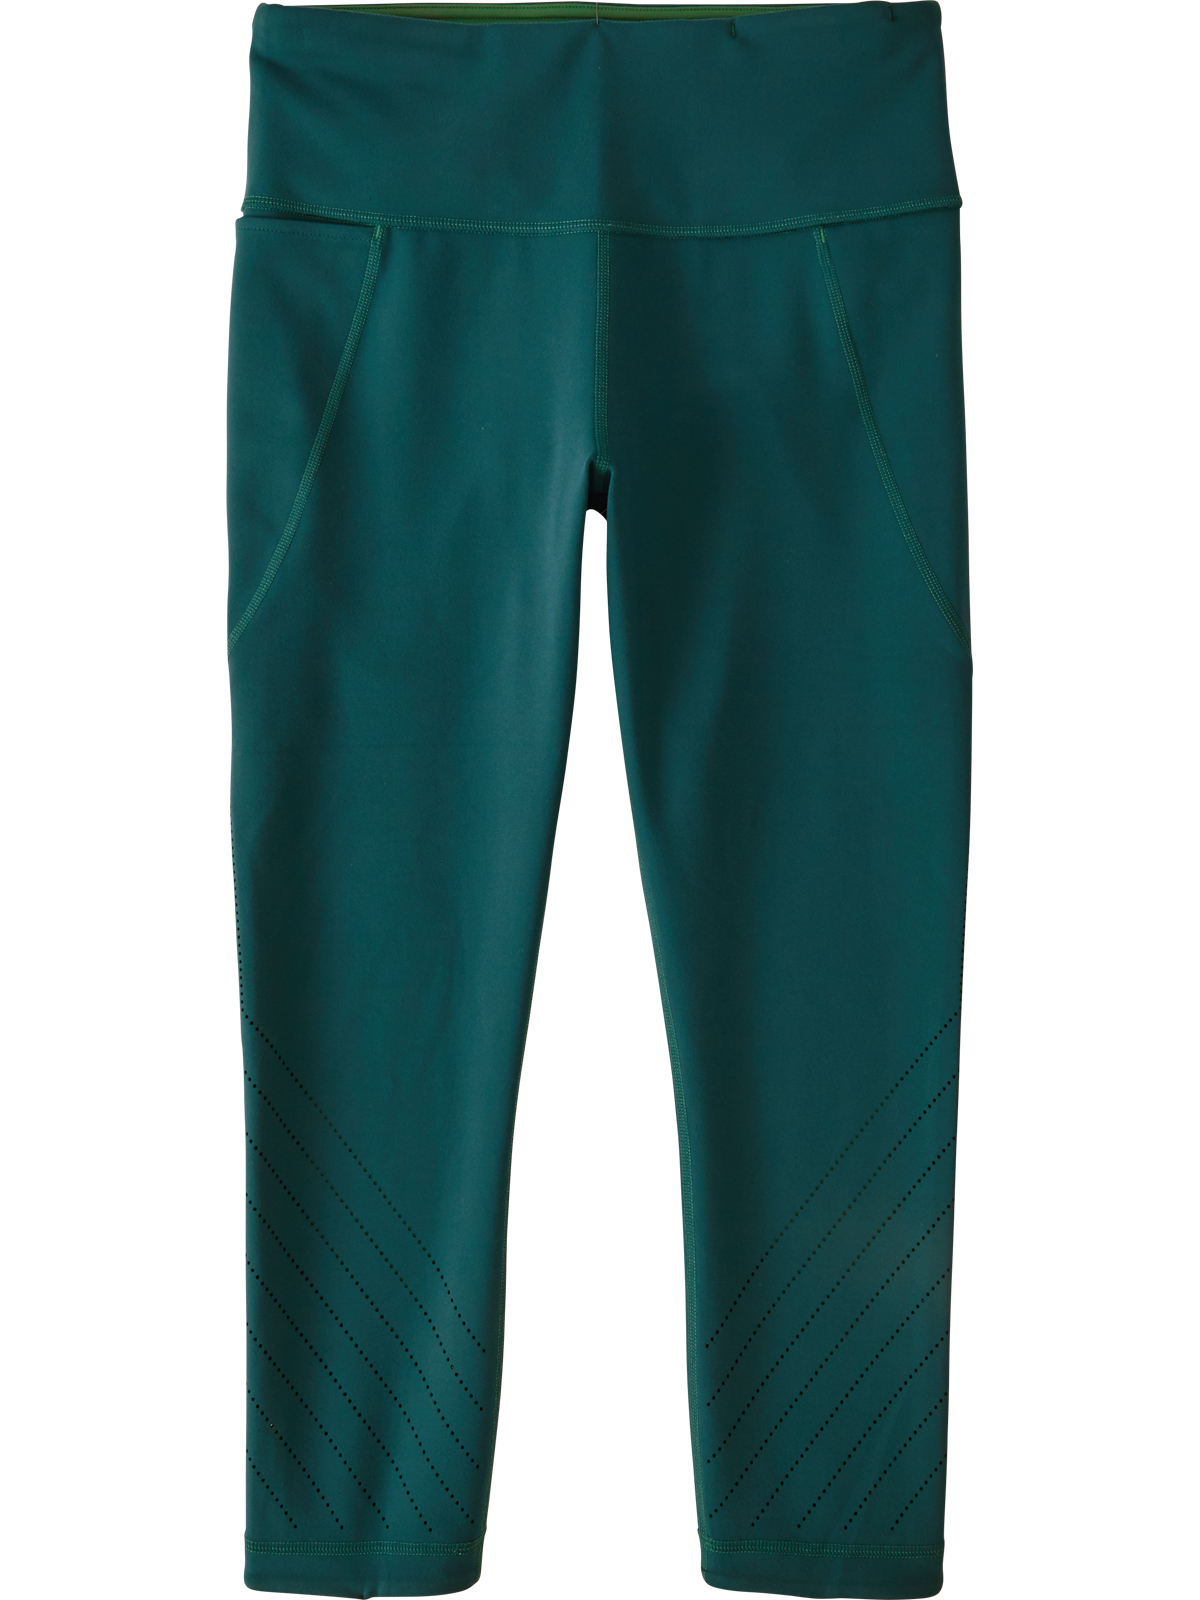 Women's hiking pants ready for your wildest adventures | Title Nine